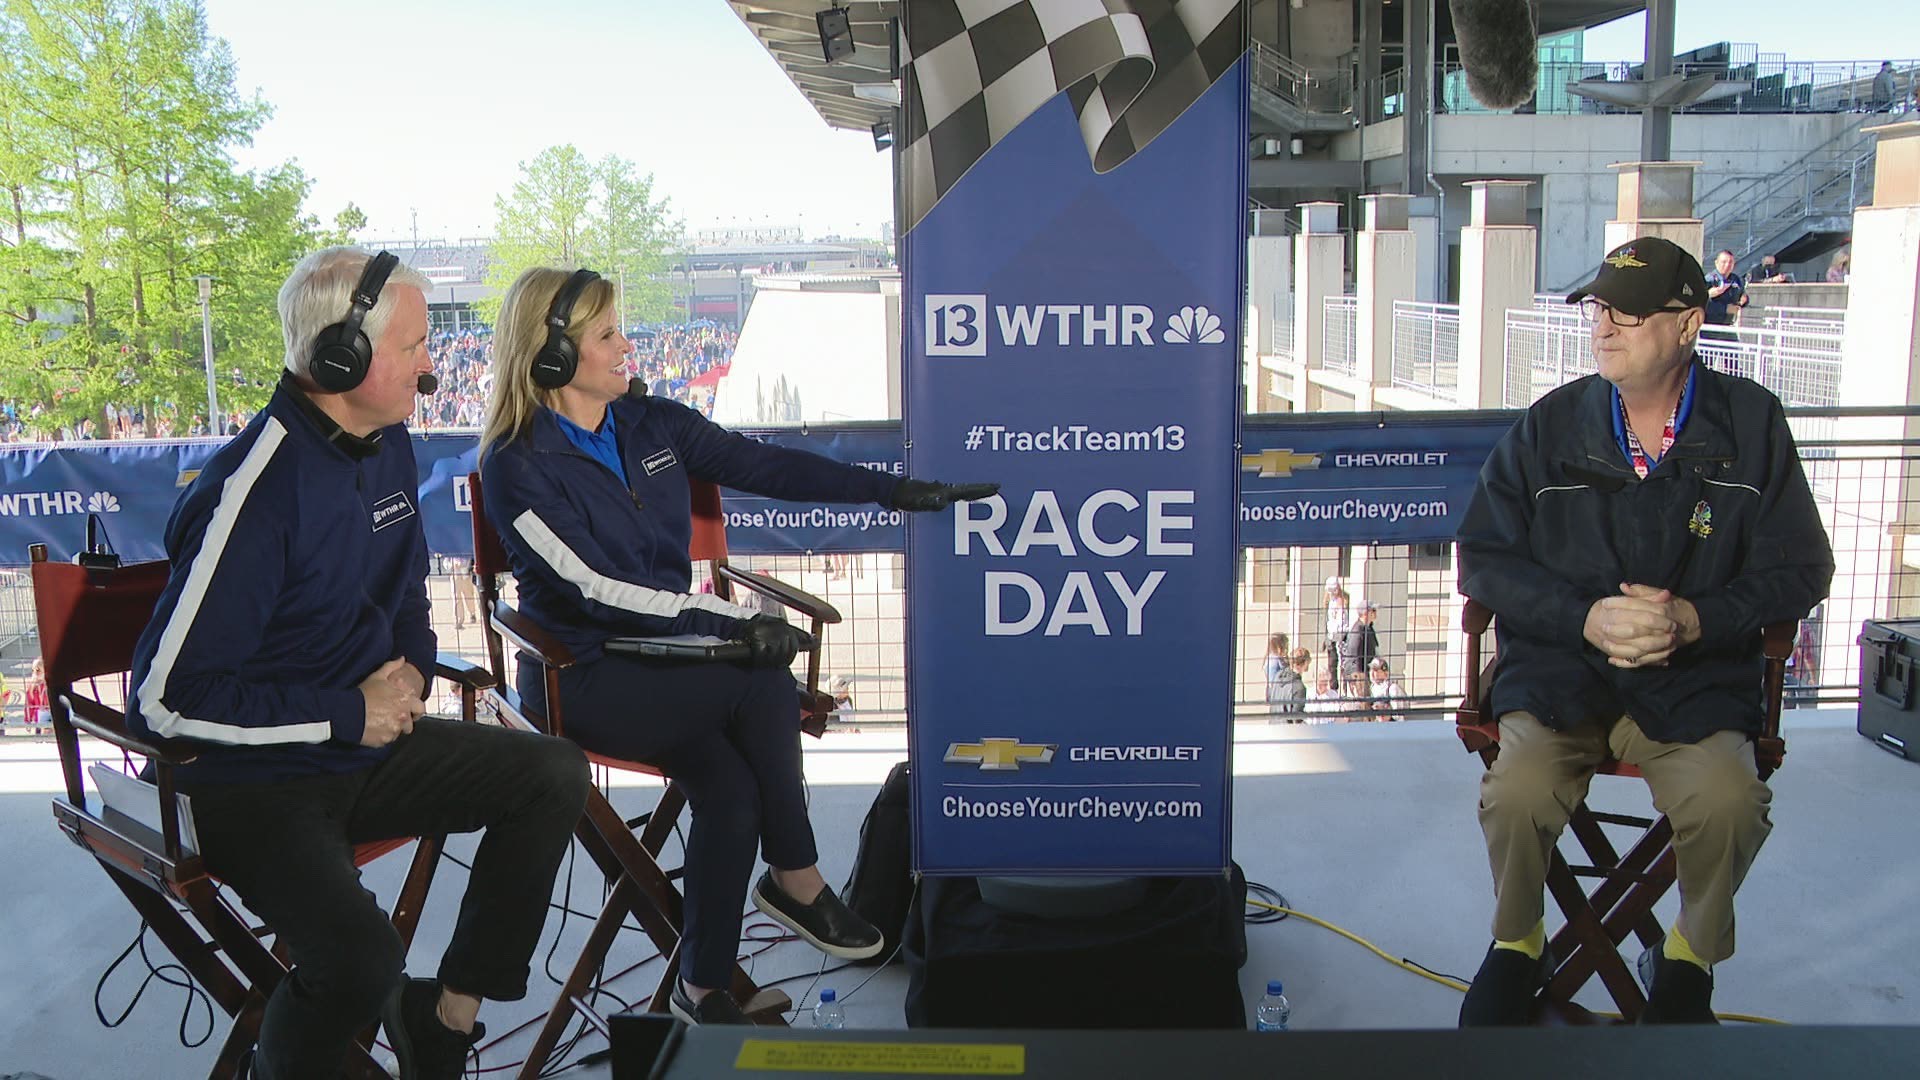 Bob Jenkins is an iconic motor racing announcer who is fighting brain cancer. He joined TrackTeam13 Sunday for a live interview before the race.